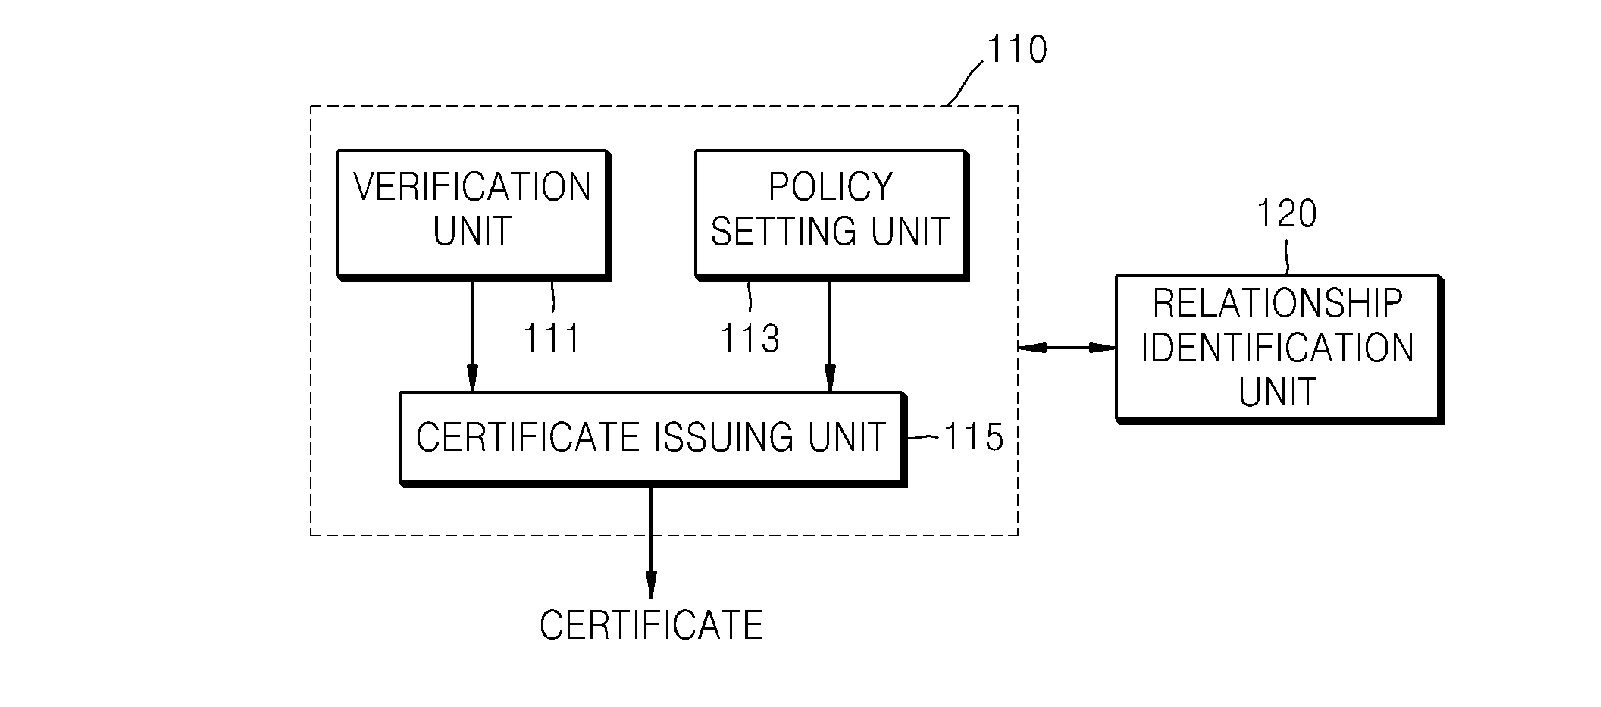 Method and apparatus for issuing certificate including legal guardian's agreement to ward